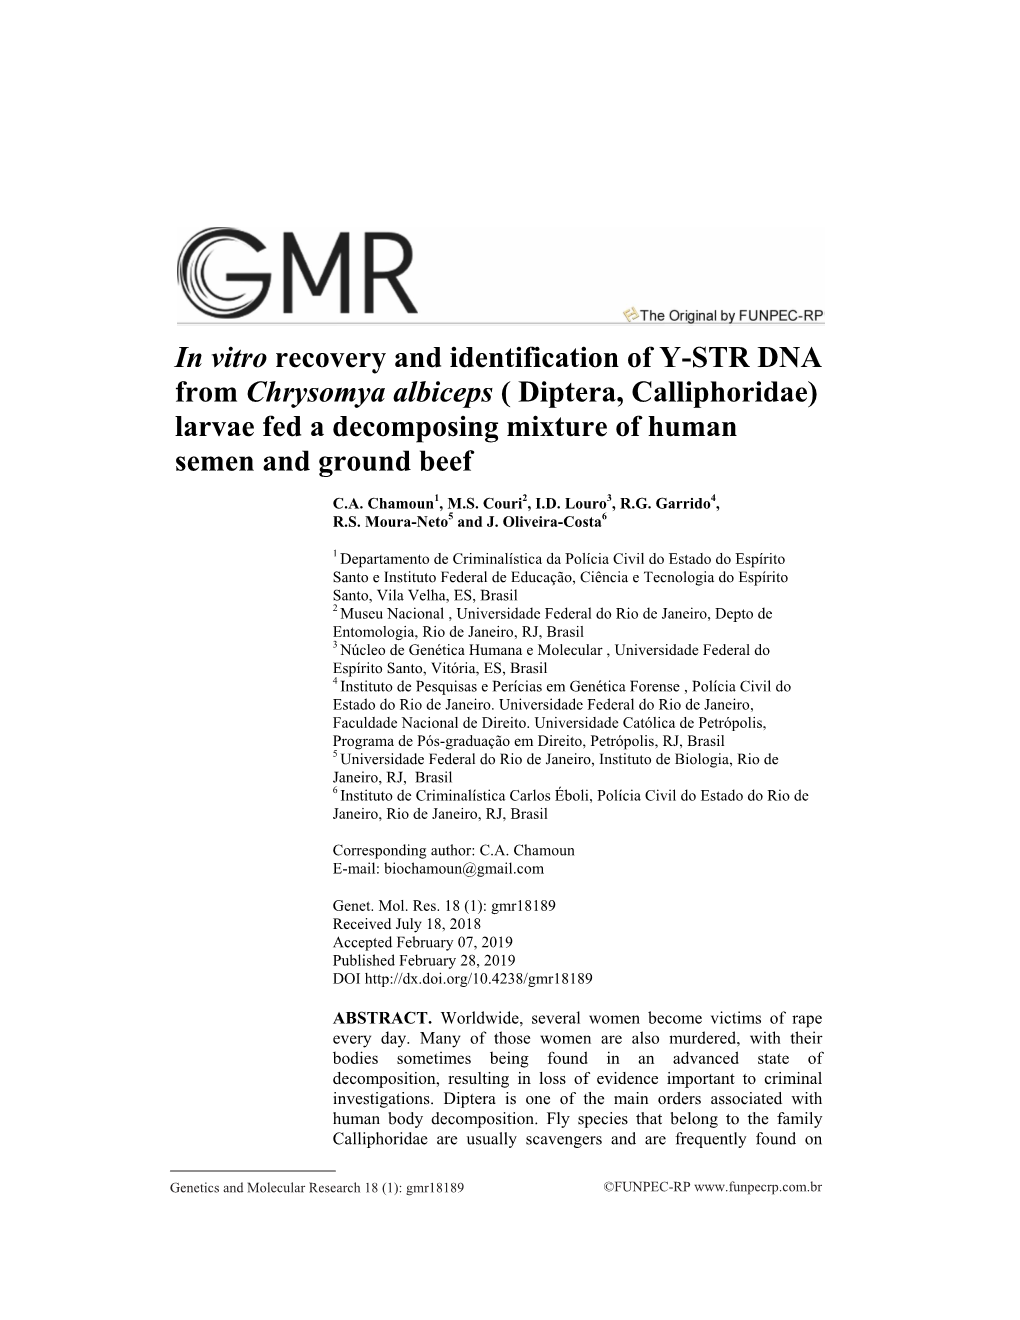 In Vitro Recovery and Identification of Y-STR DNA from Chrysomya Albiceps ( Diptera, Calliphoridae) Larvae Fed a Decomposing Mixture of Human Semen and Ground Beef